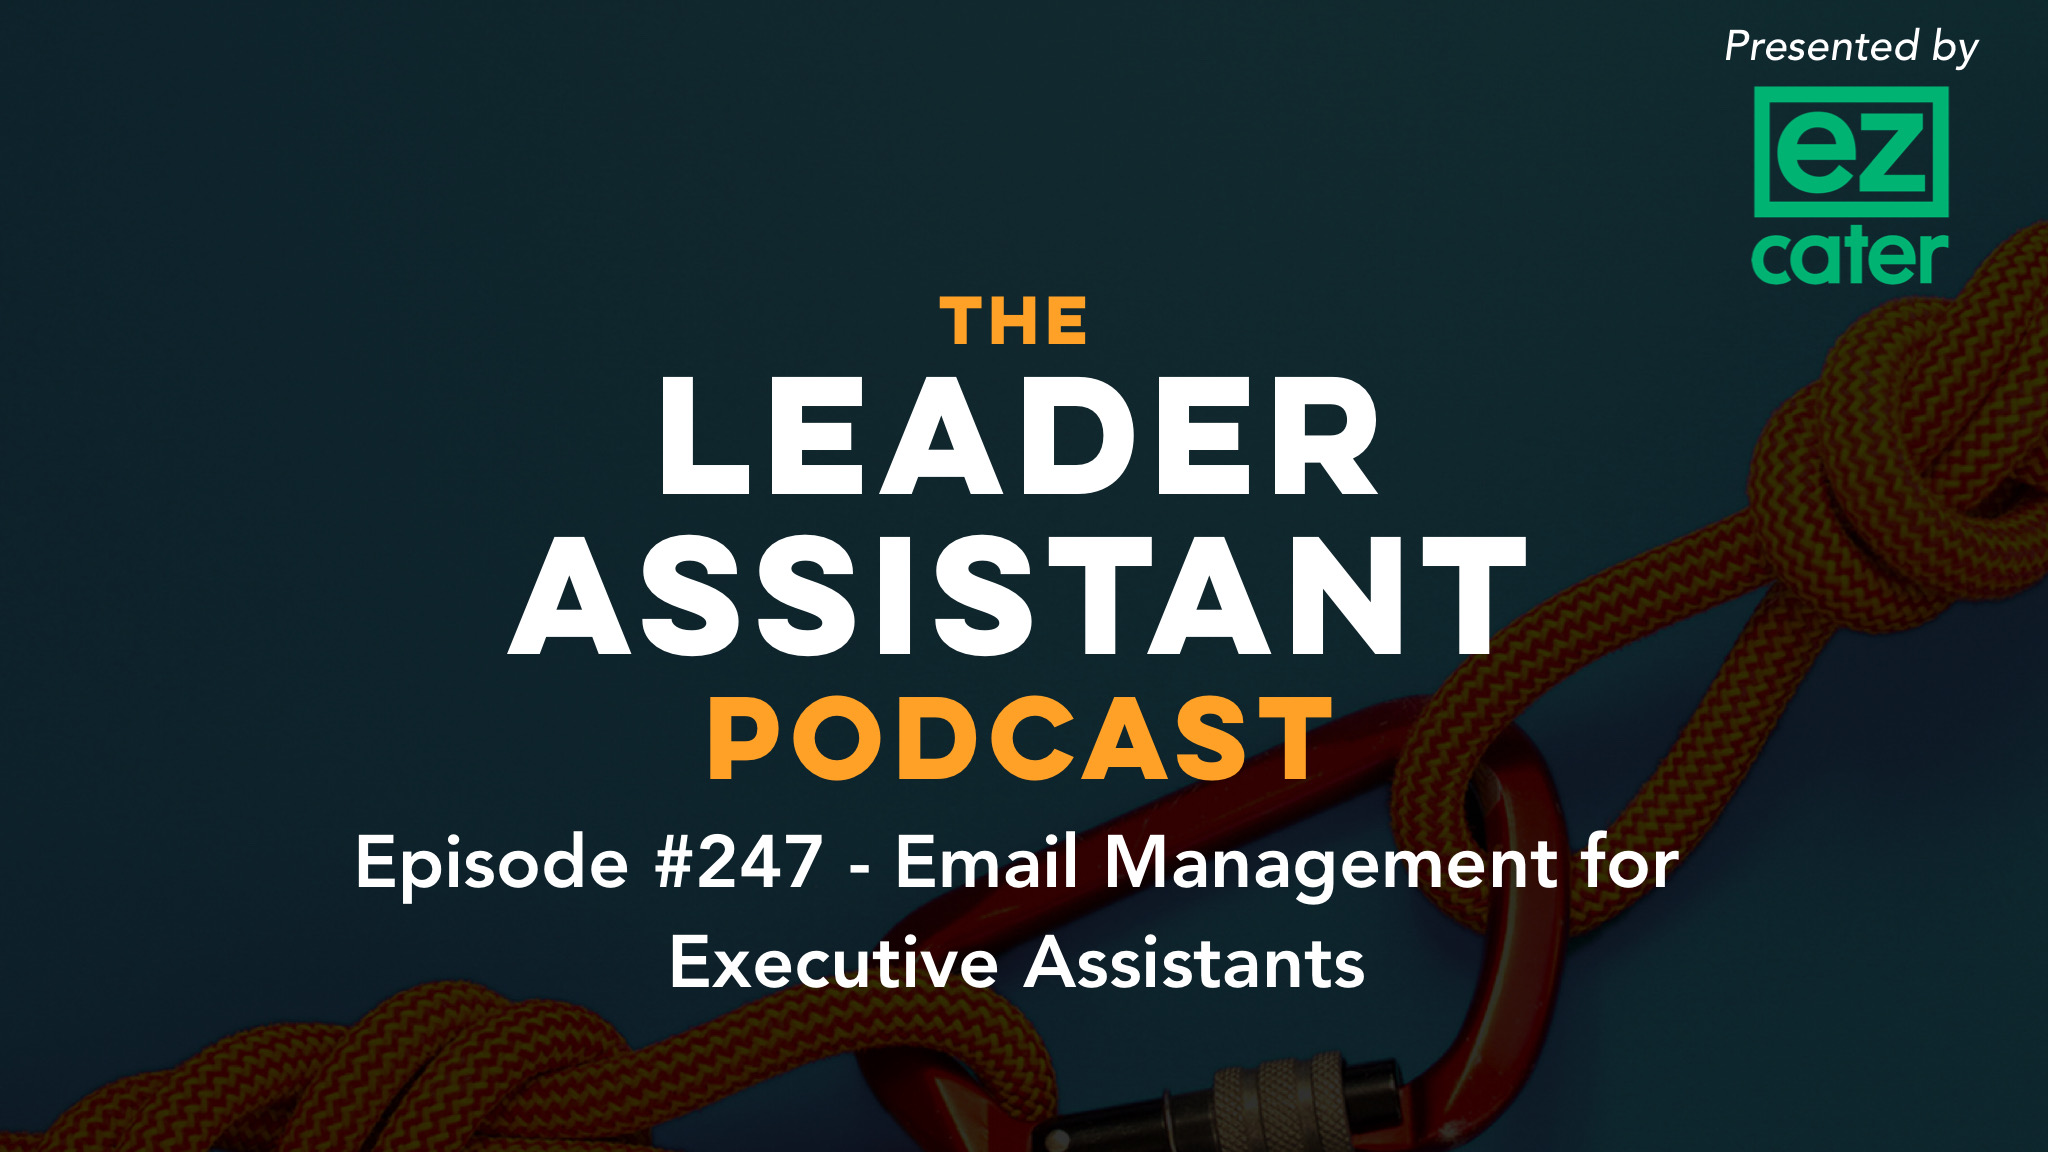 ep247 - Email Management for Executive Assistants the leader assistant podcast